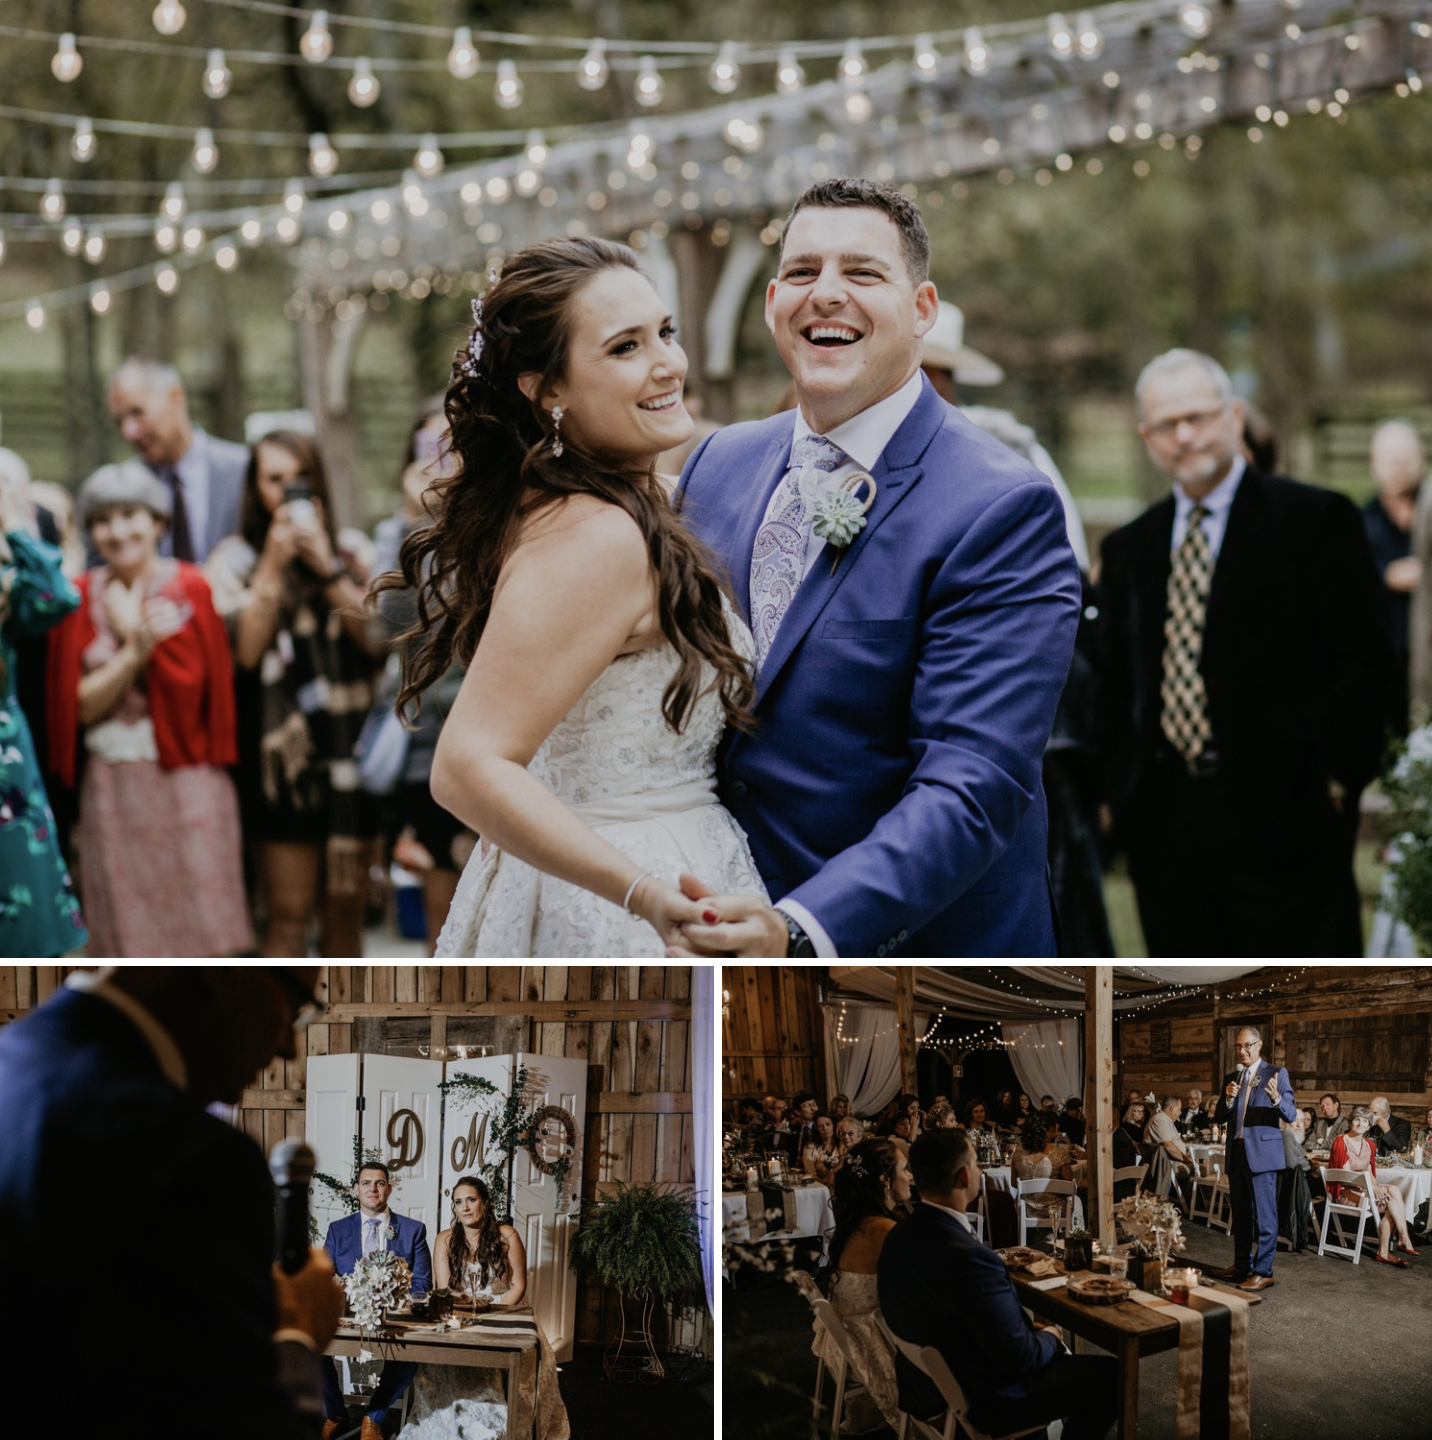 The bride and grooms first dance and speeches and their Garrett Farm wedding.